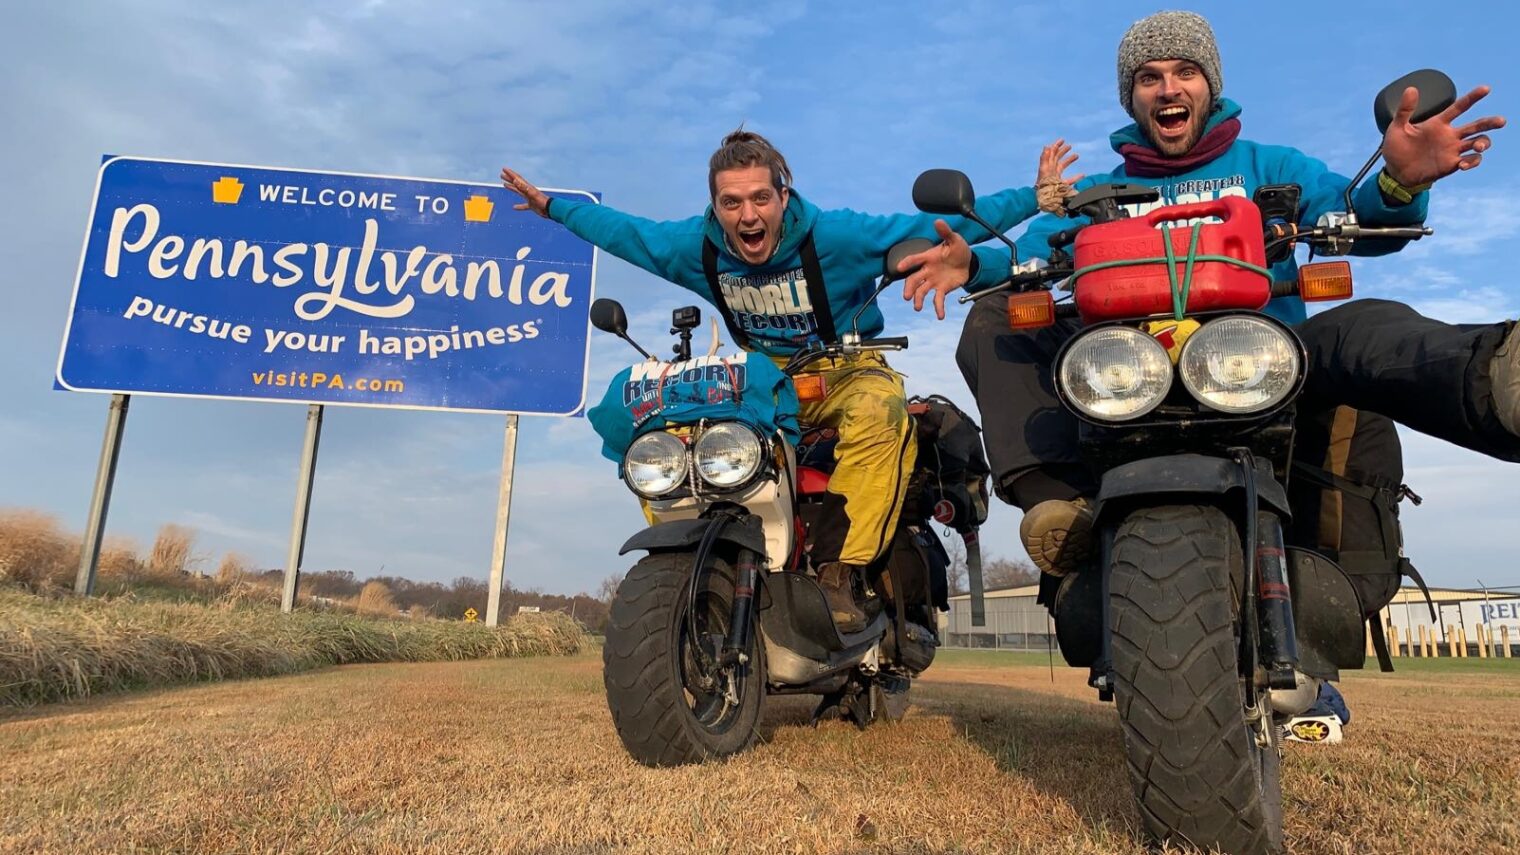 Friends Yonatan Belik and Mike Reid on their journey to showcase the beautiful diversity of people in the United States. Photo courtesy of Wheeling for The World